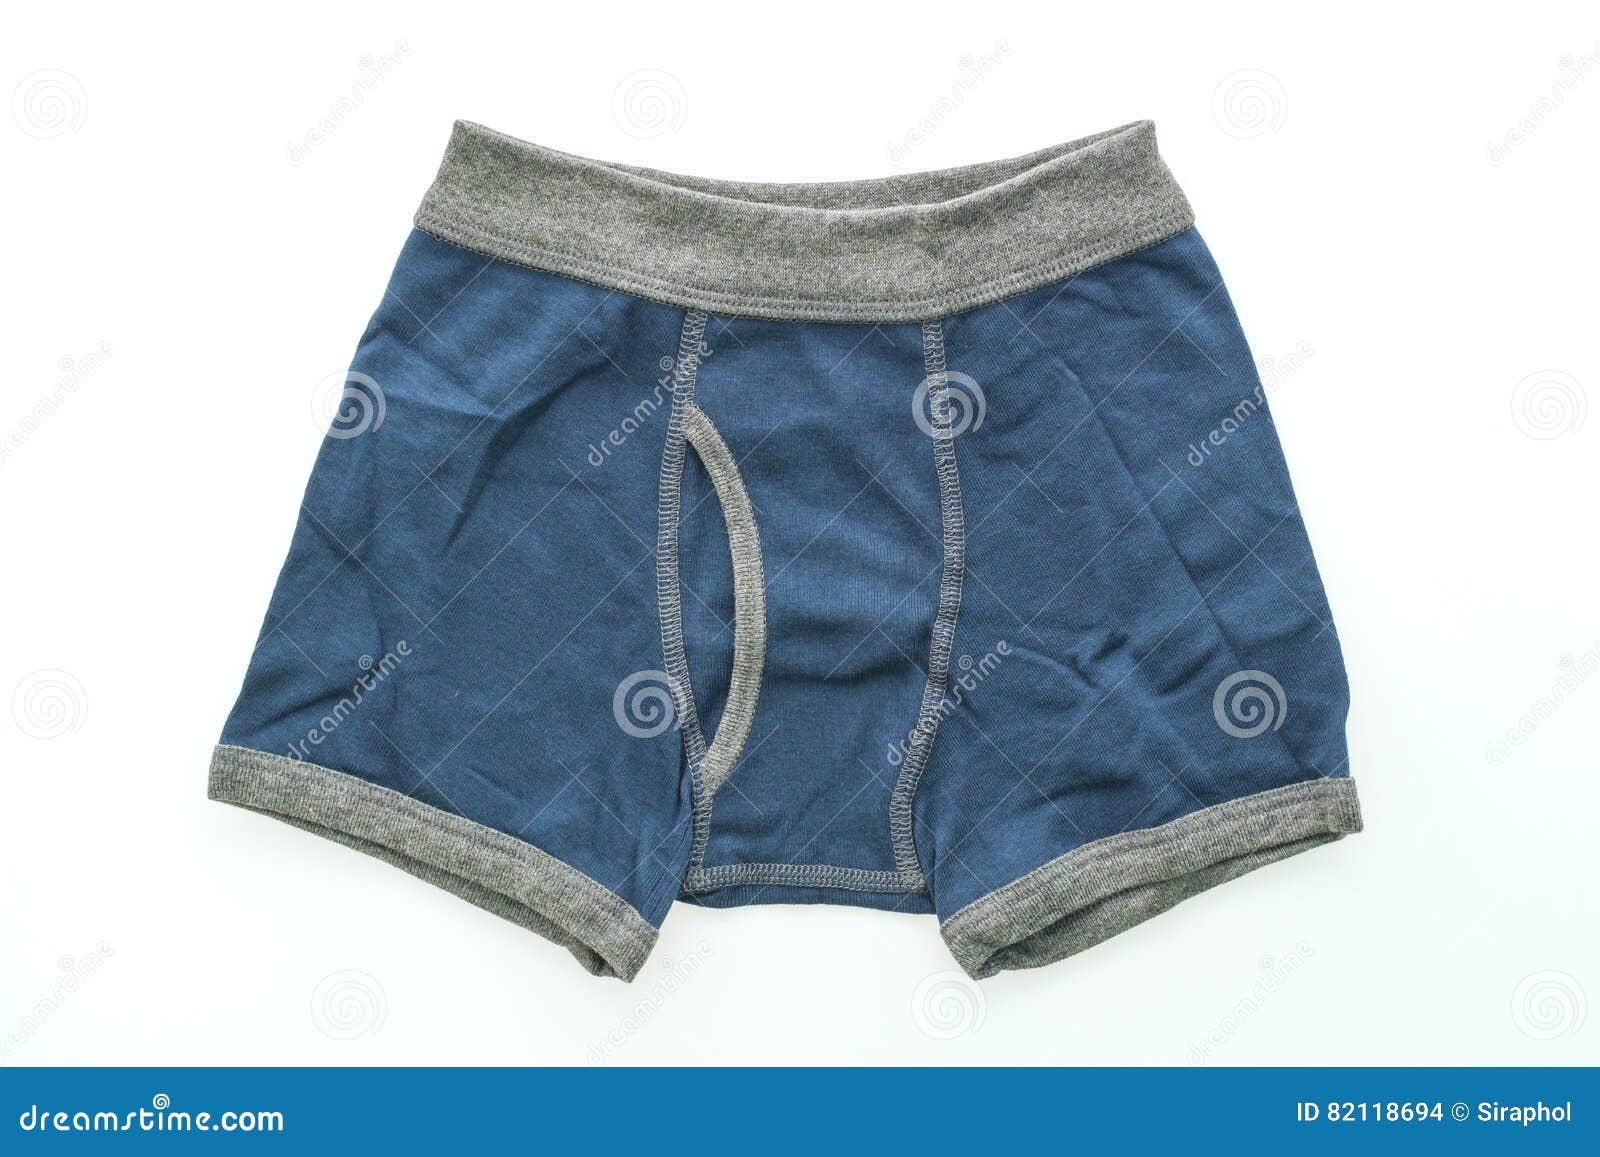 Short Underwear for Kid and Boy Stock Photo - Image of trunks ...